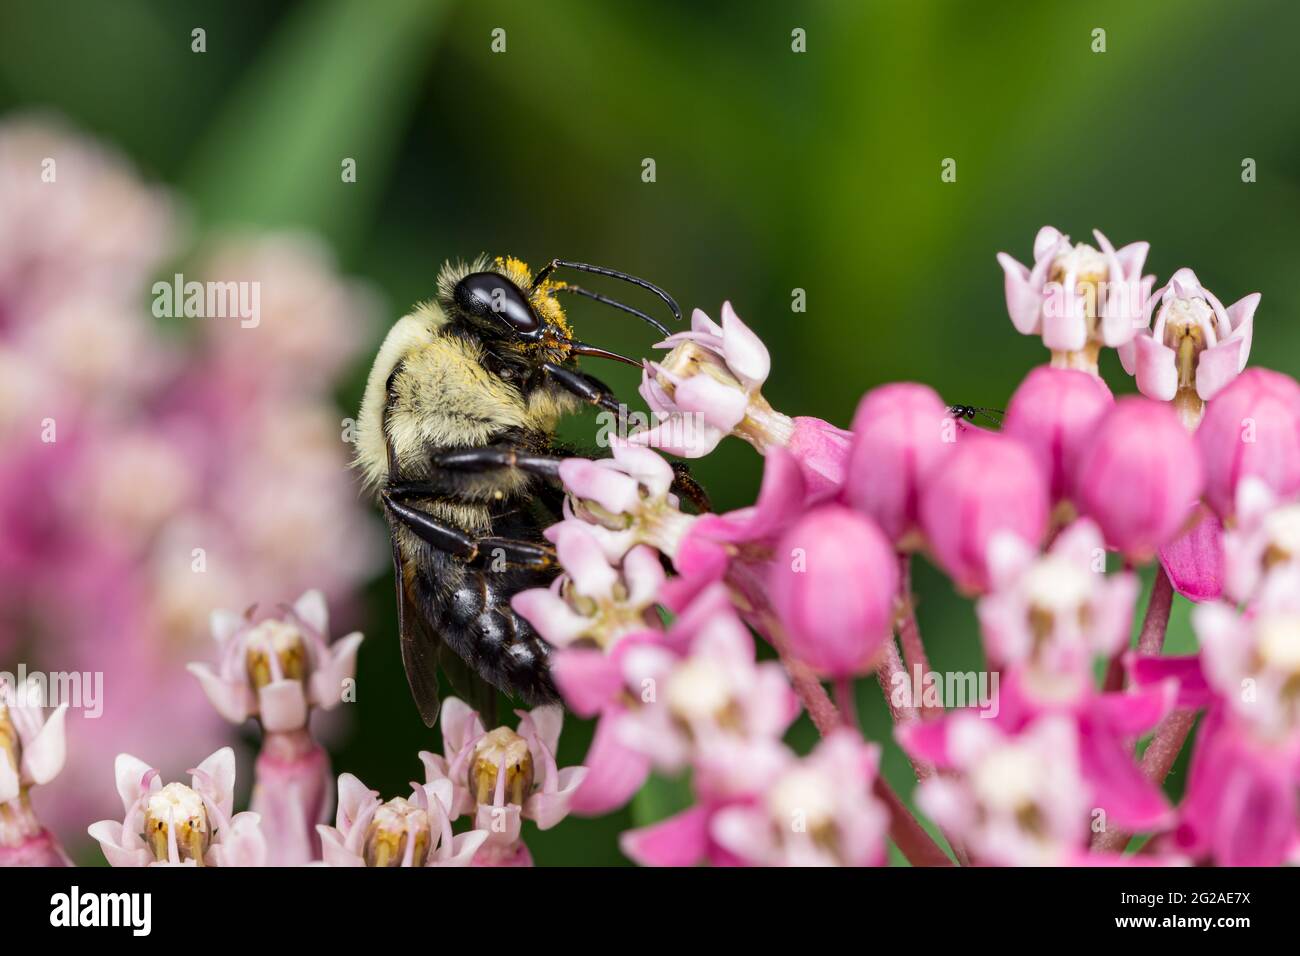 Closeup of common Eastern Bumble Bee on swamp milkweed wildflower. Concept of insect and wildlife conservation, habitat preservation, and backyard flo Stock Photo